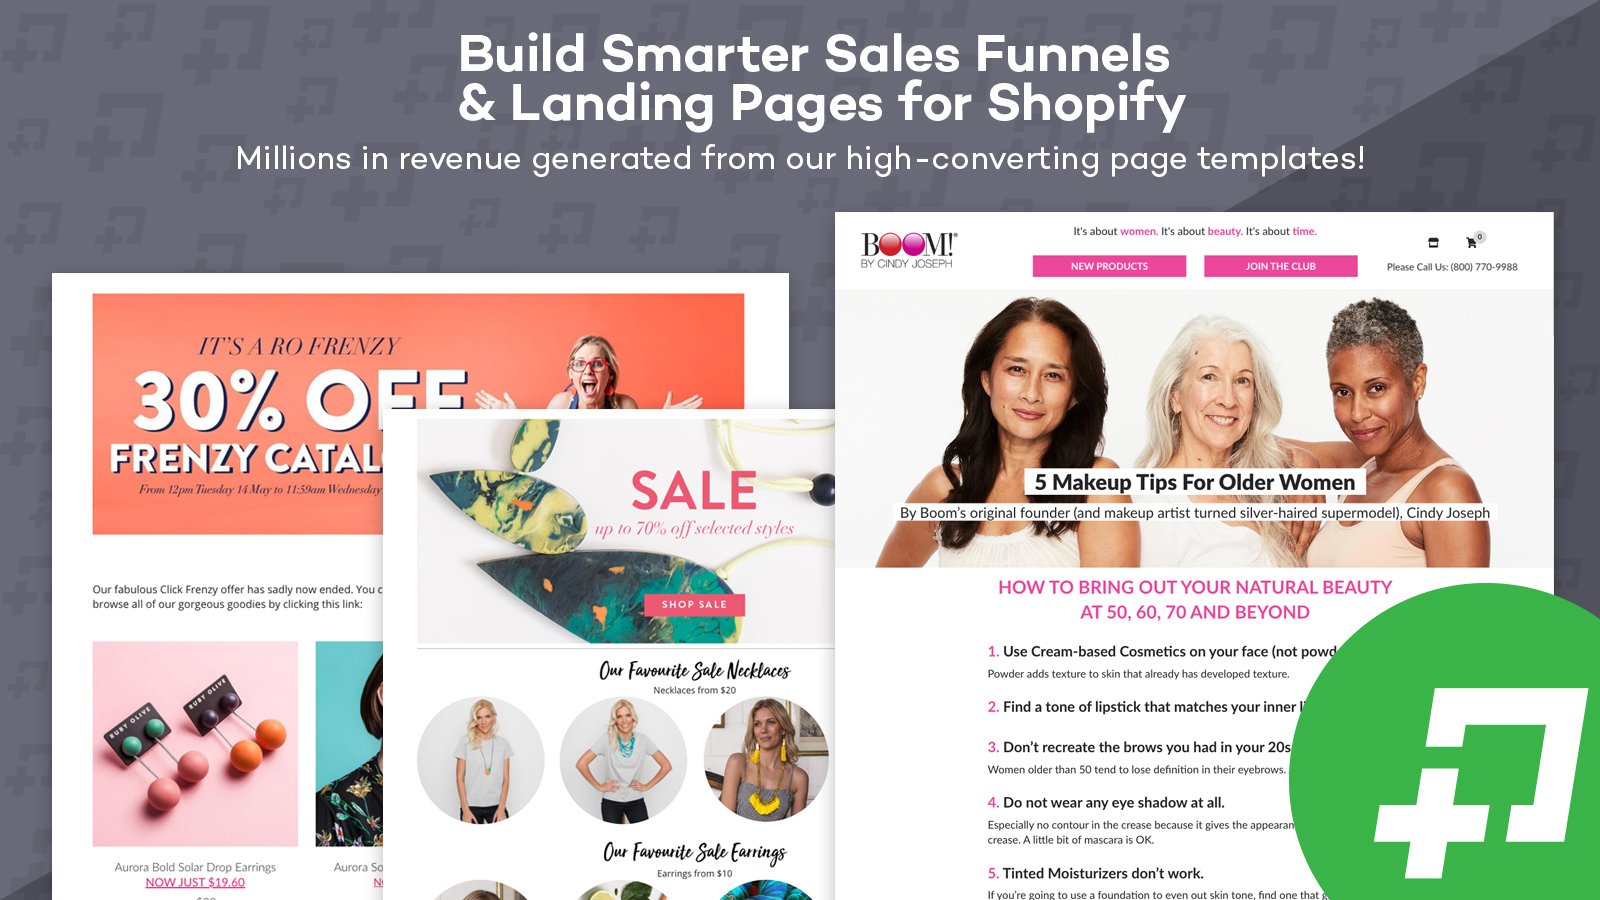 Lots of proven and tested landing page templates